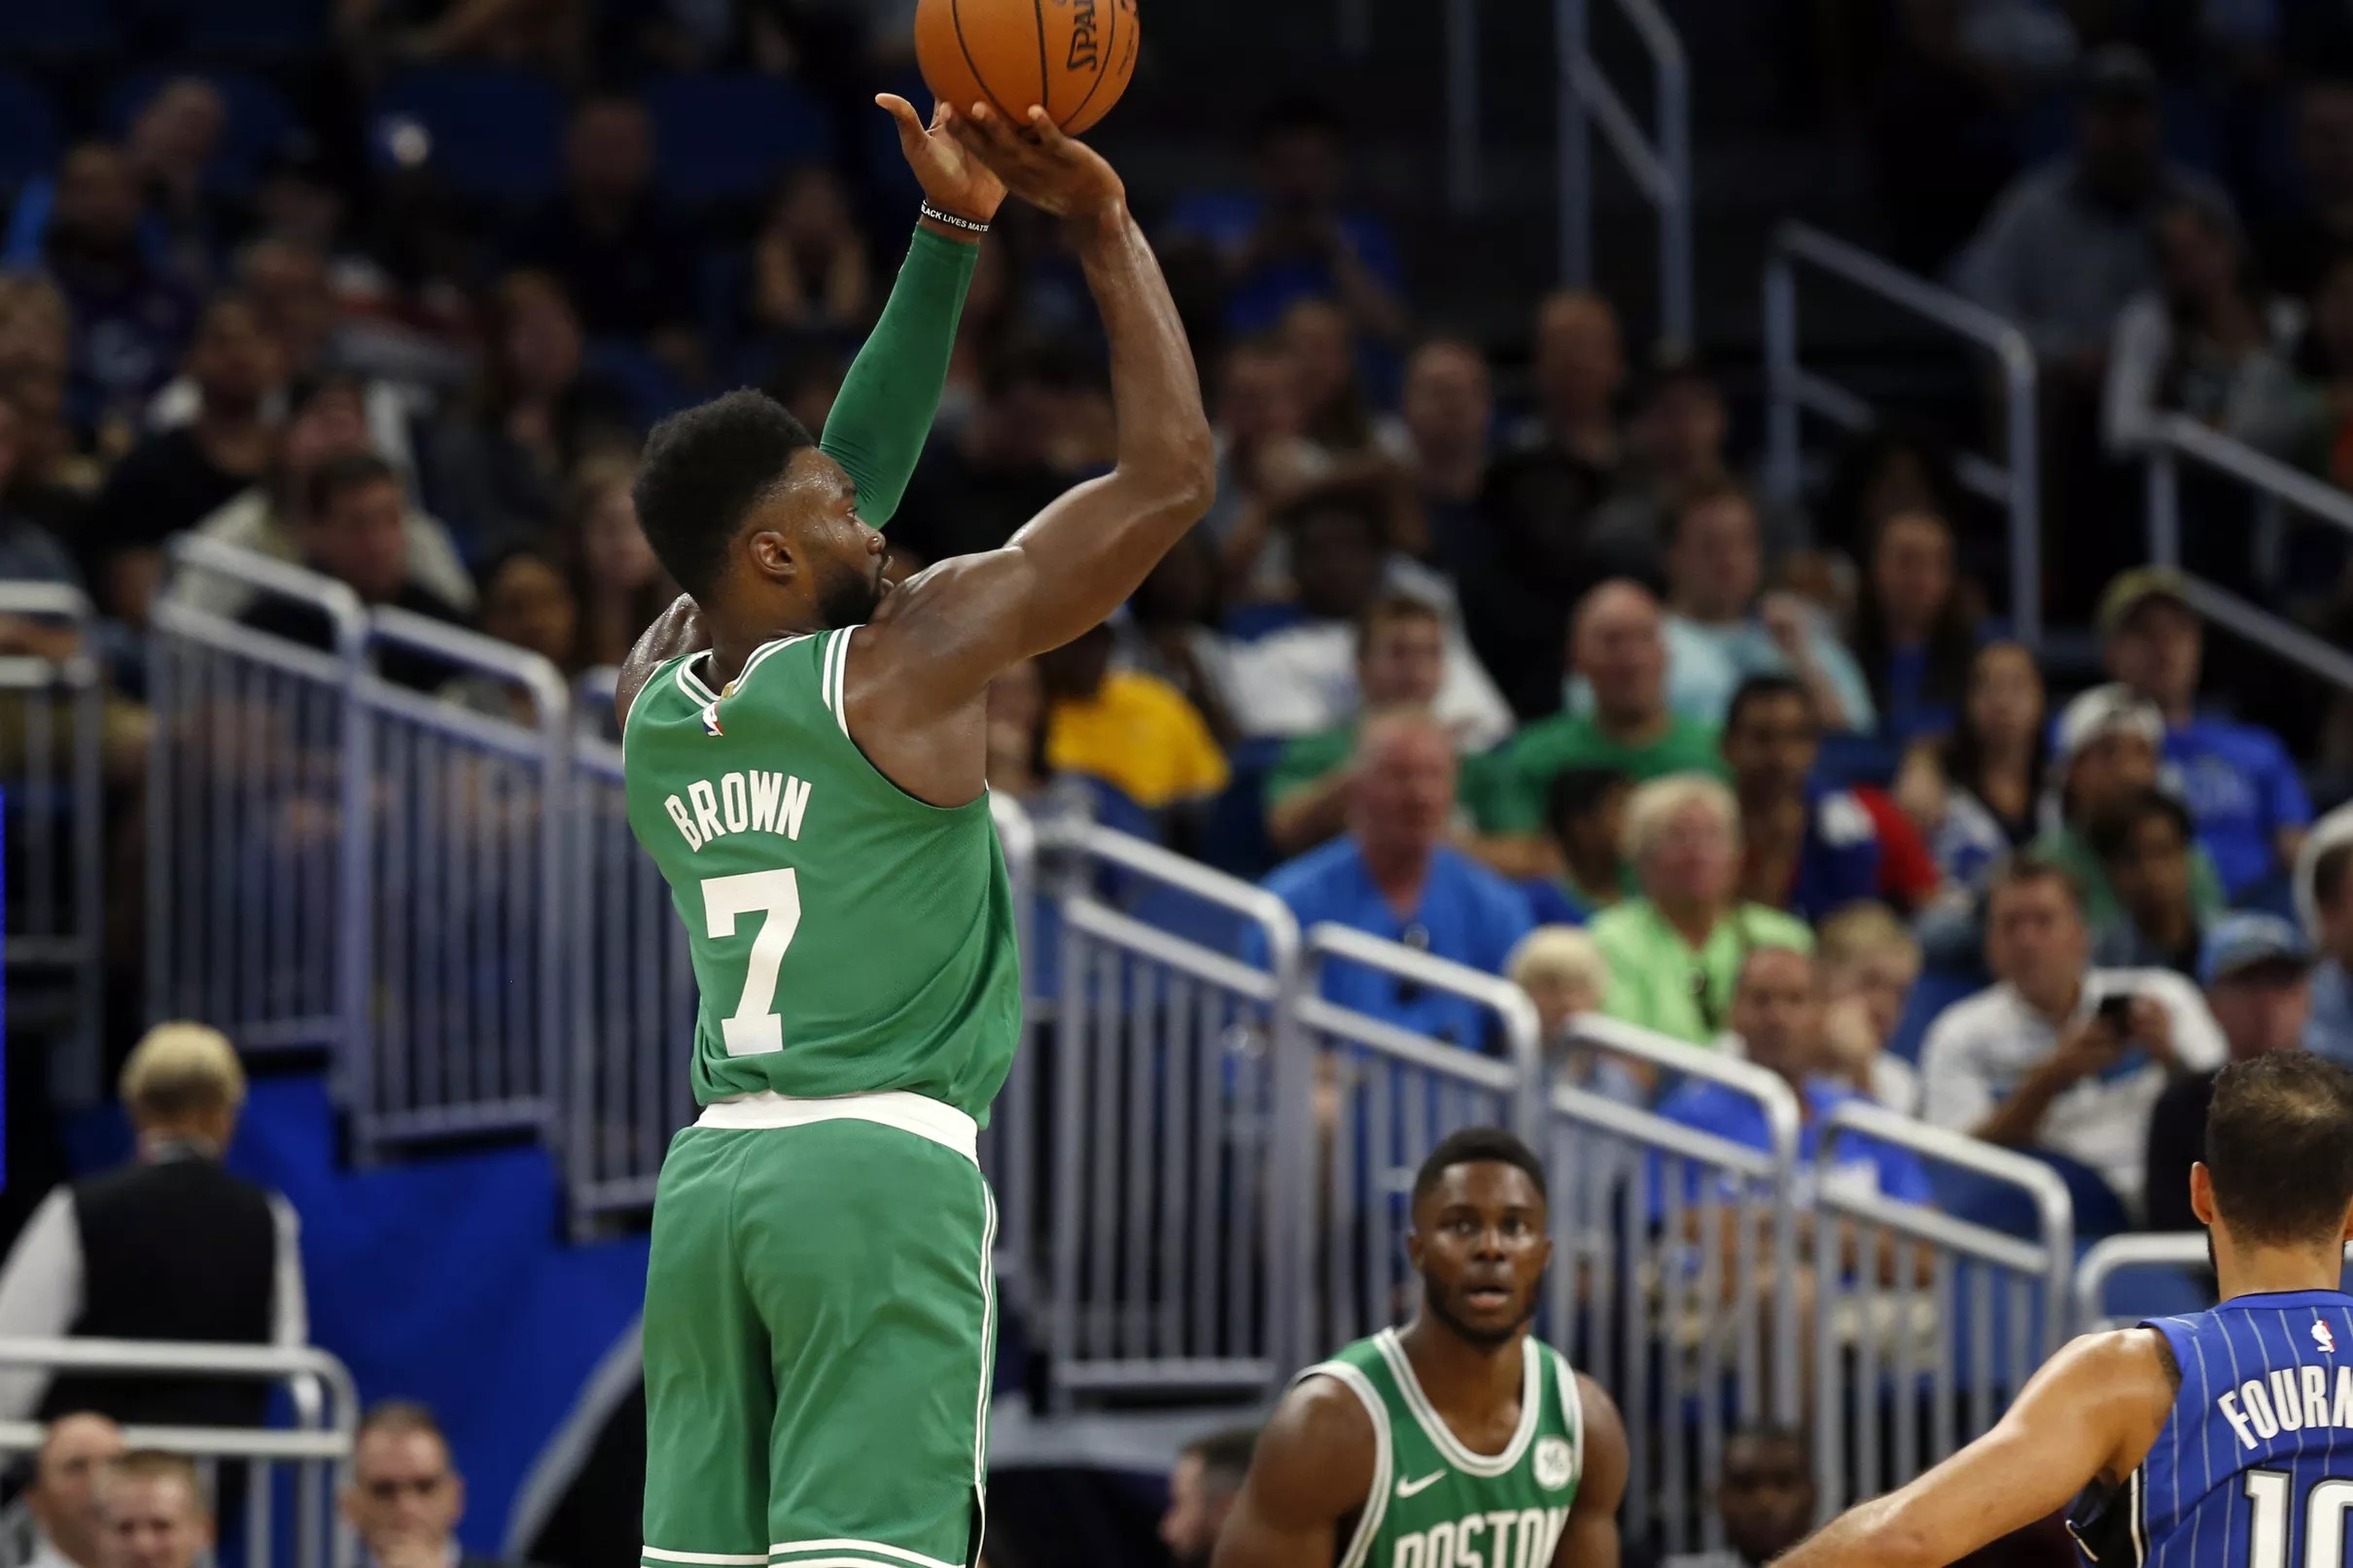 Celtics win their 8th straight game with a 10488 victory in Orlando